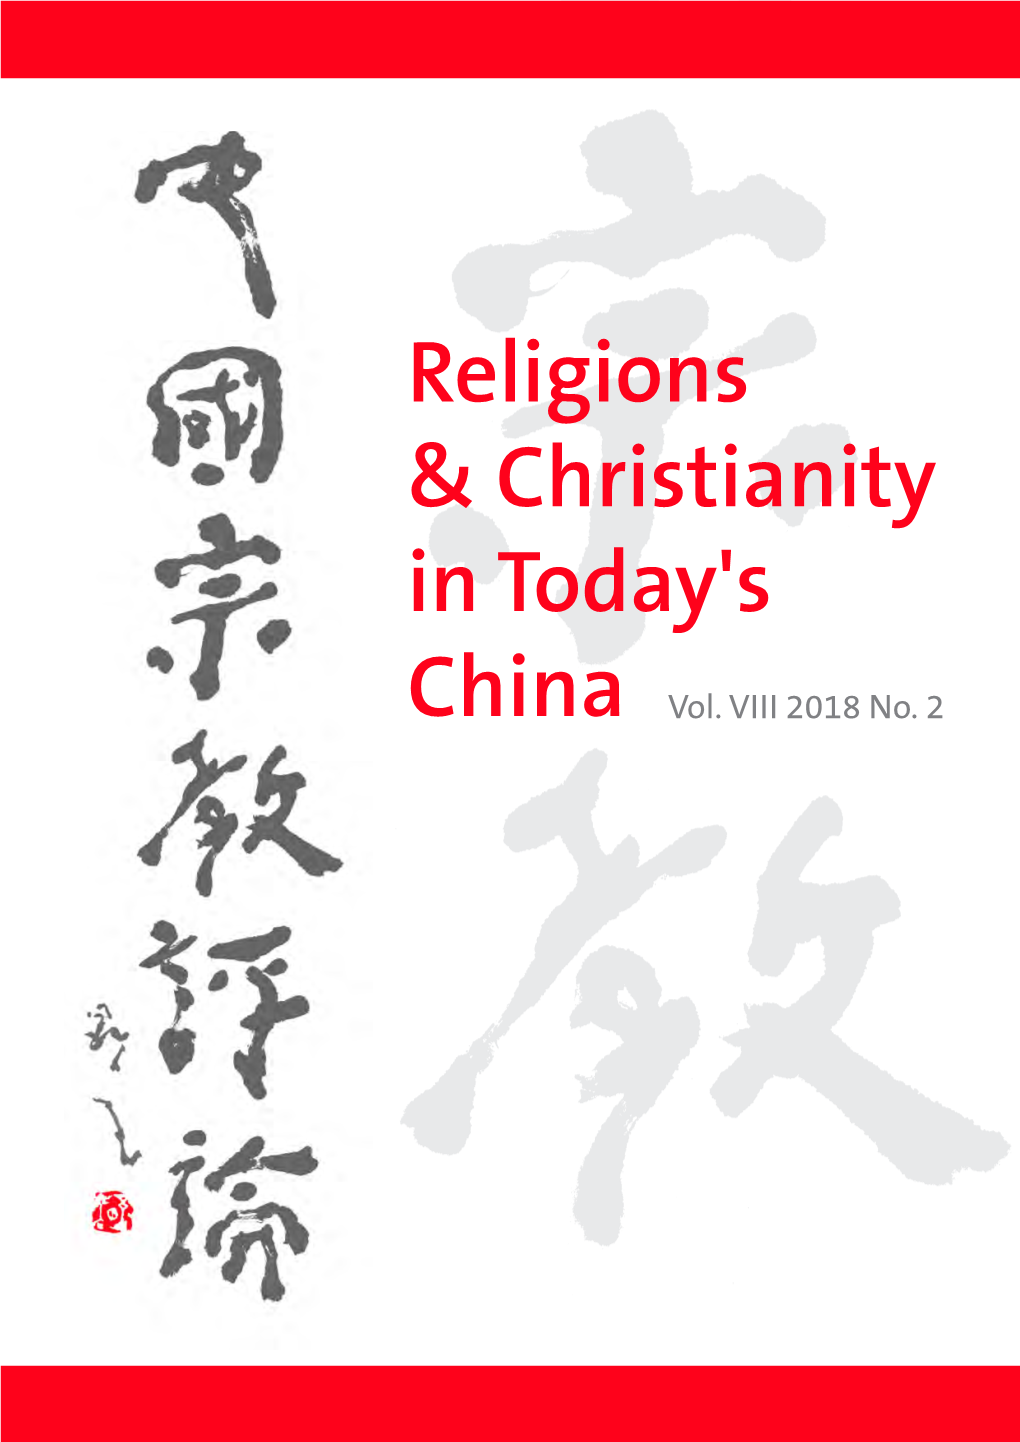 Religions & Christianity in Today's China Vol. VIII 2018 No. 2